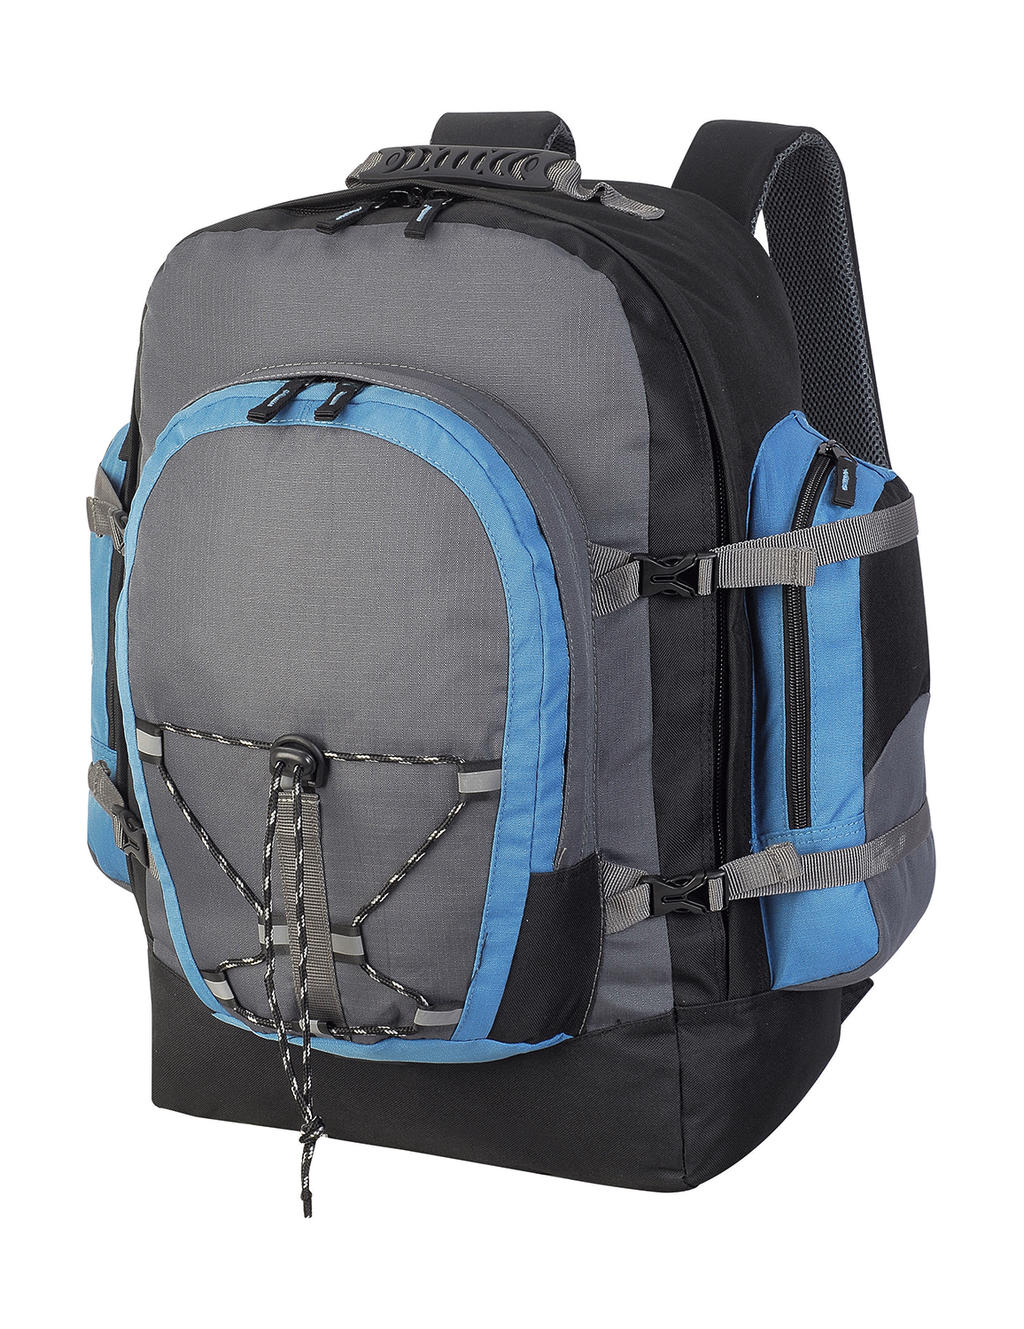 Monte Rosa Classic Travel Backpack